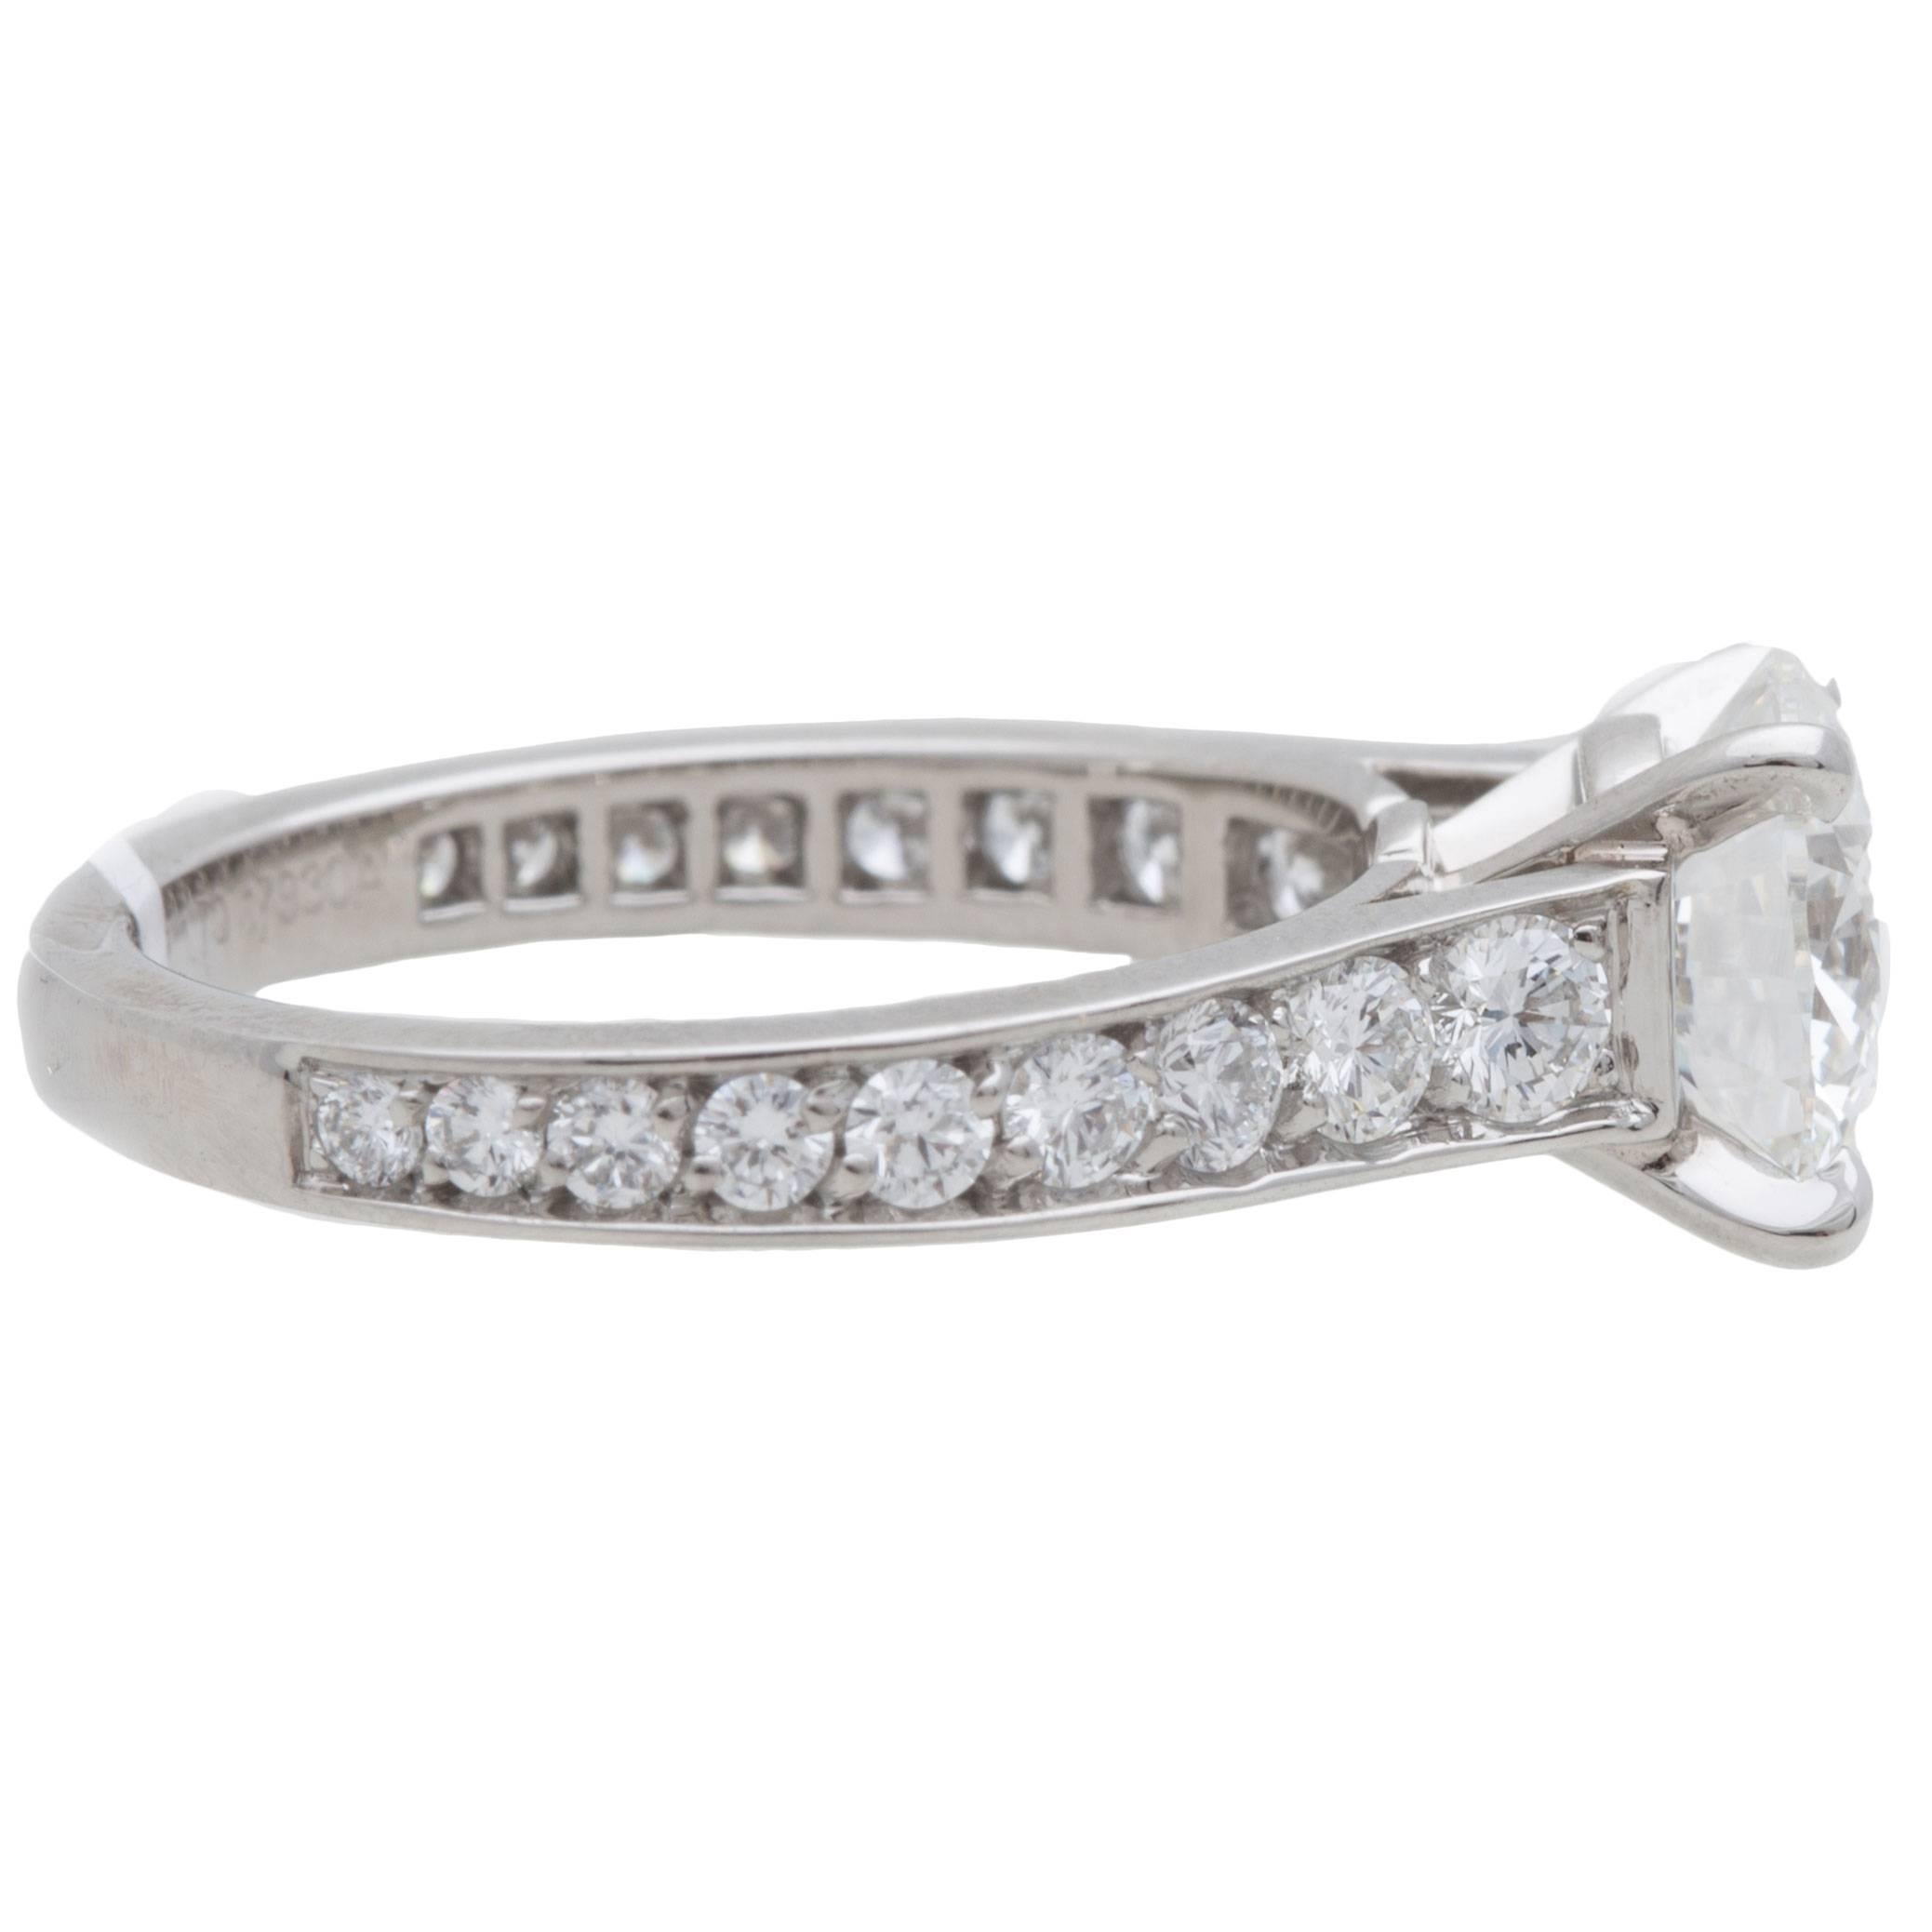 Cartier 1.70ct Platinum Ring with a G VVS1 GIA certified center stone, Ring Size 51/ USA 5 1/2.